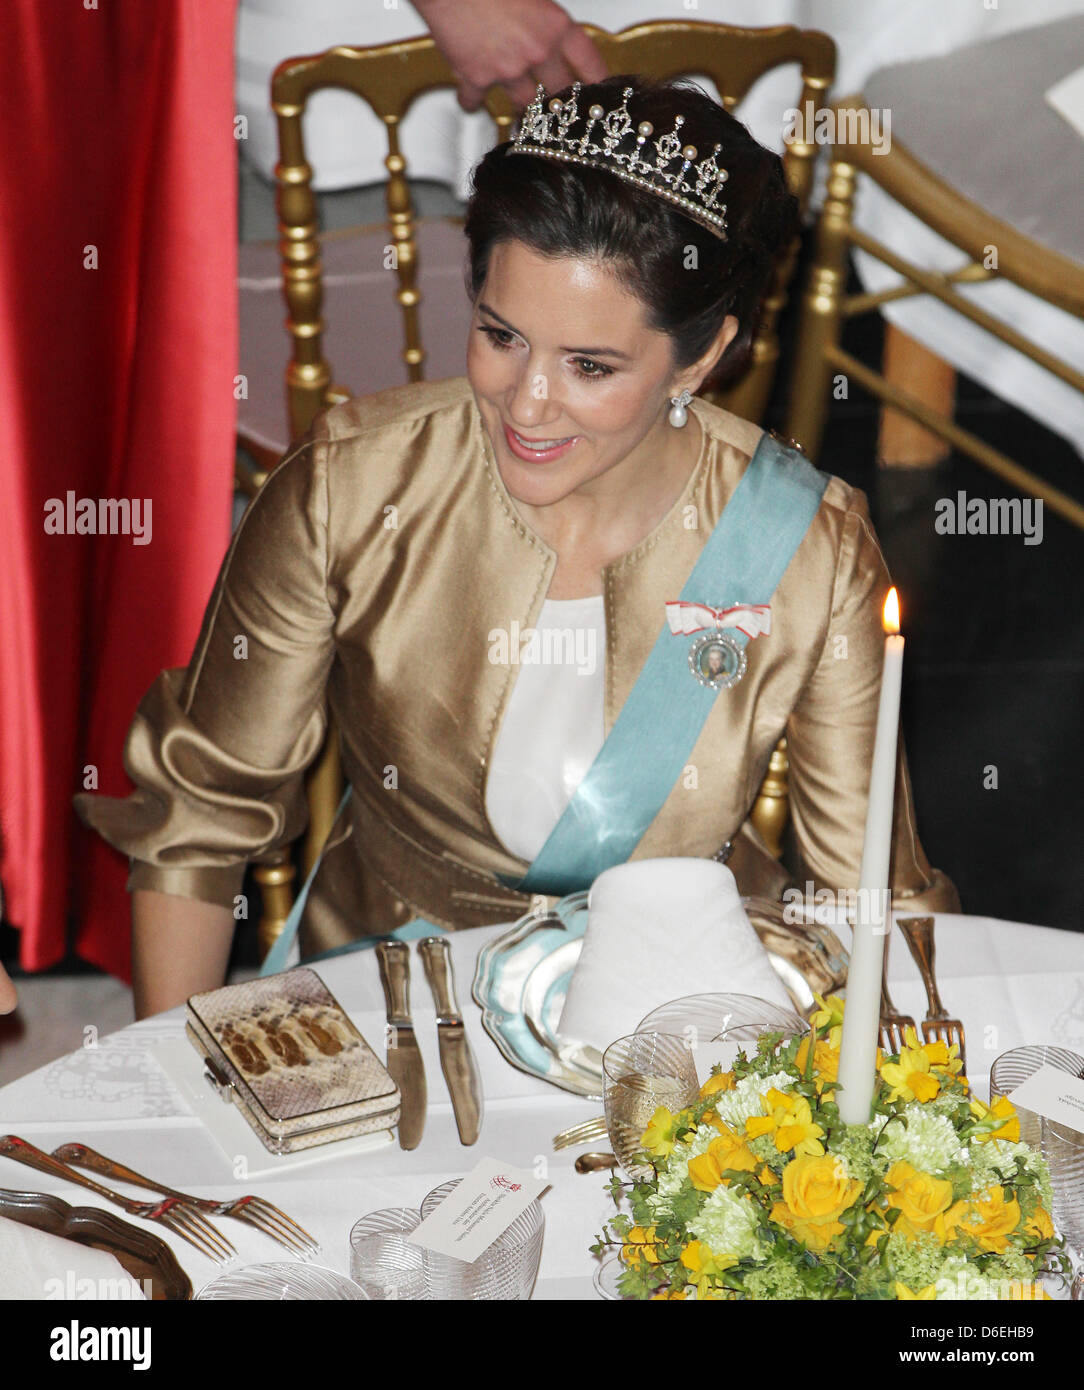 crown-princess-mary-of-denmark-attends-the-dinner-for-the-diplomatic-D6EHB9.jpg